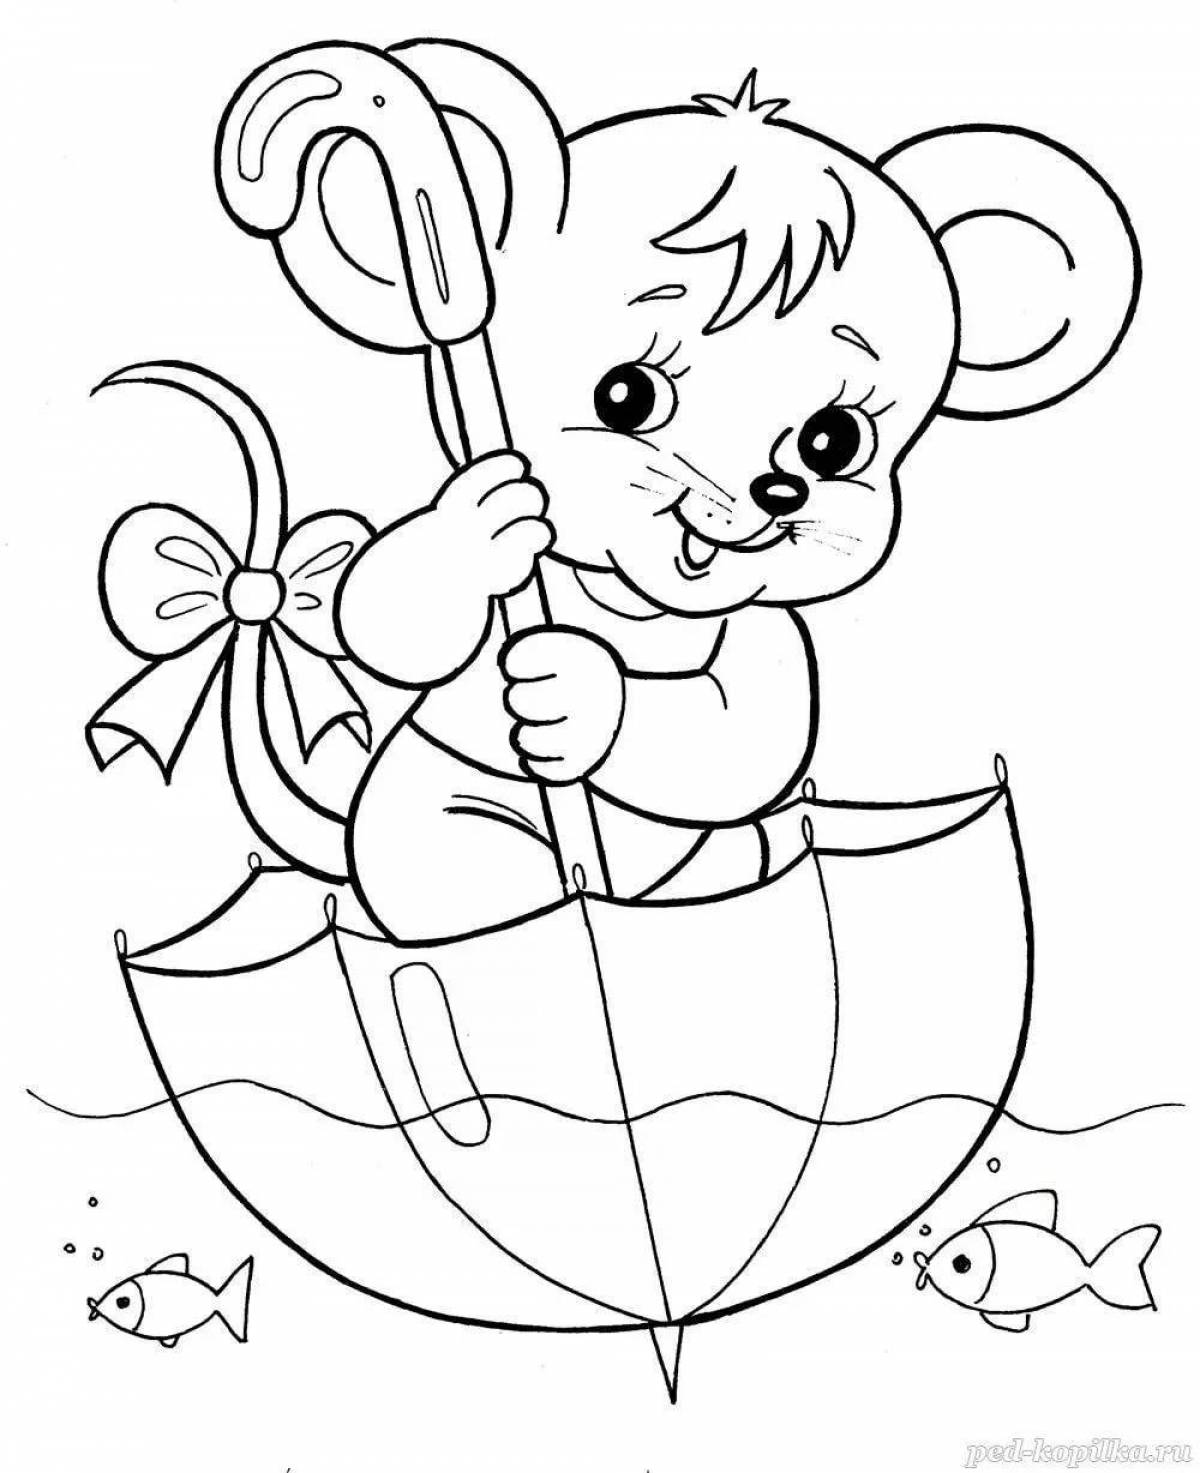 Charming coloring book 5-6 years old